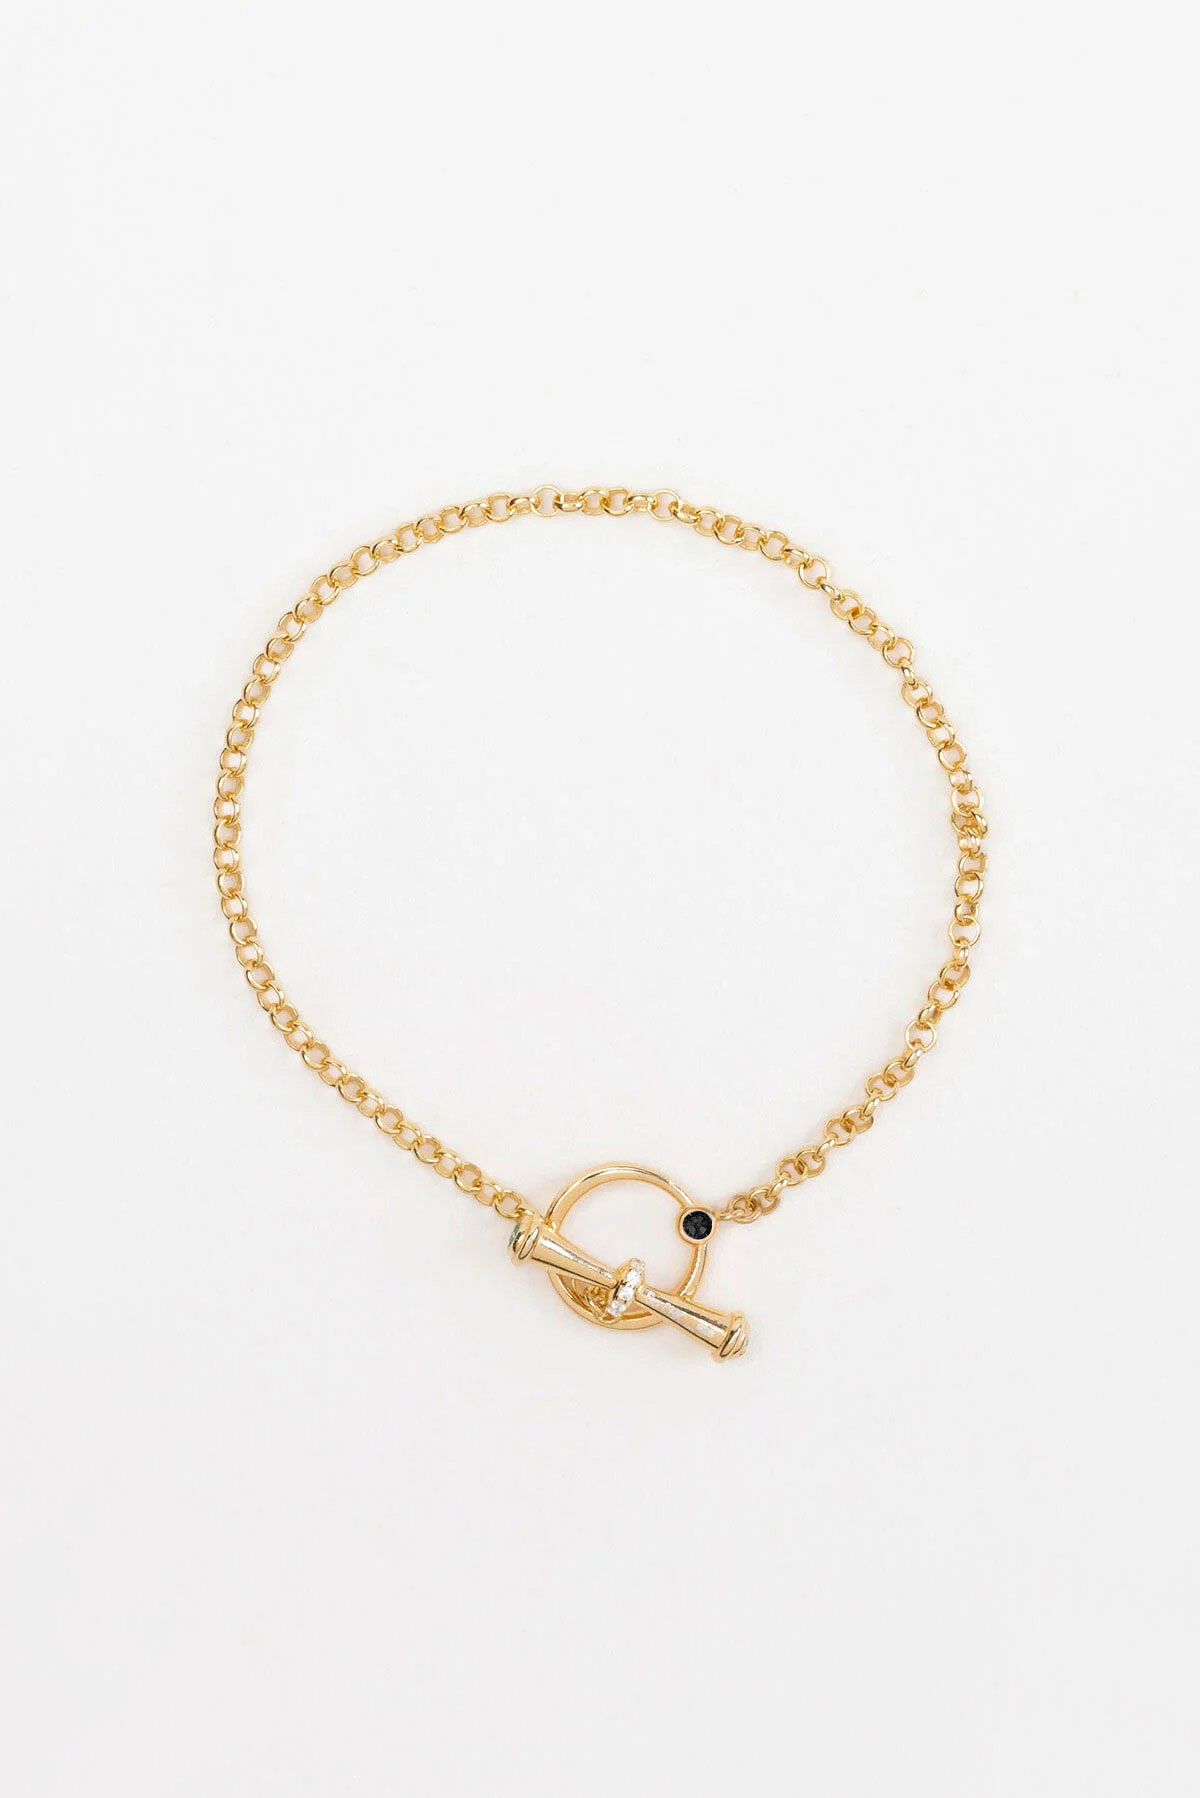 18 Karat Yellow Gold Plated Silver Chain Bracelet with Black Stone Detail